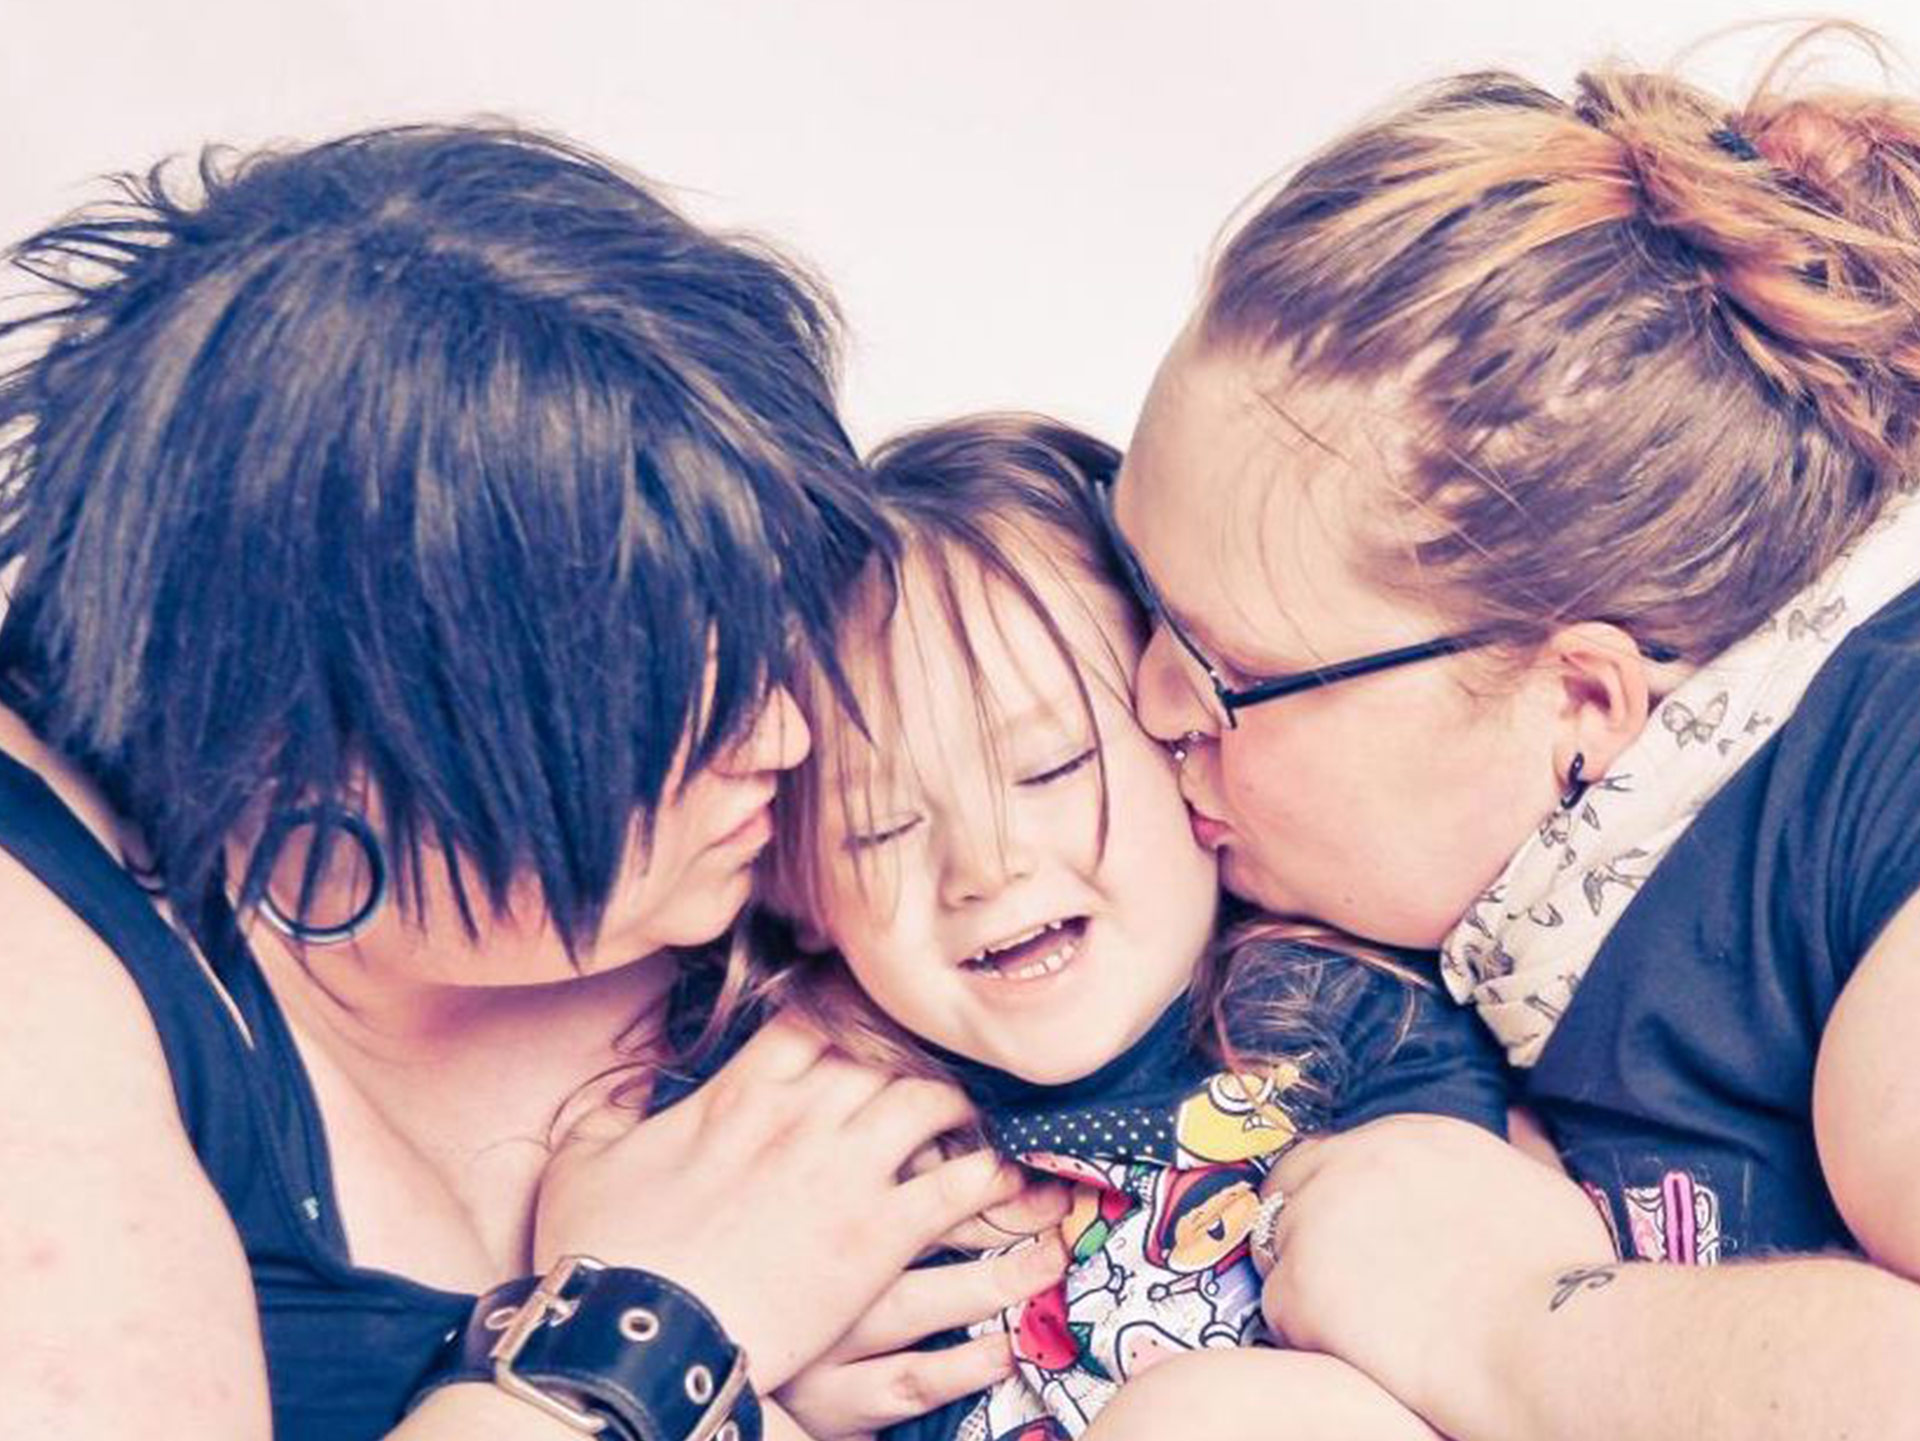 These transgender parents explain they are raising a person, not a son